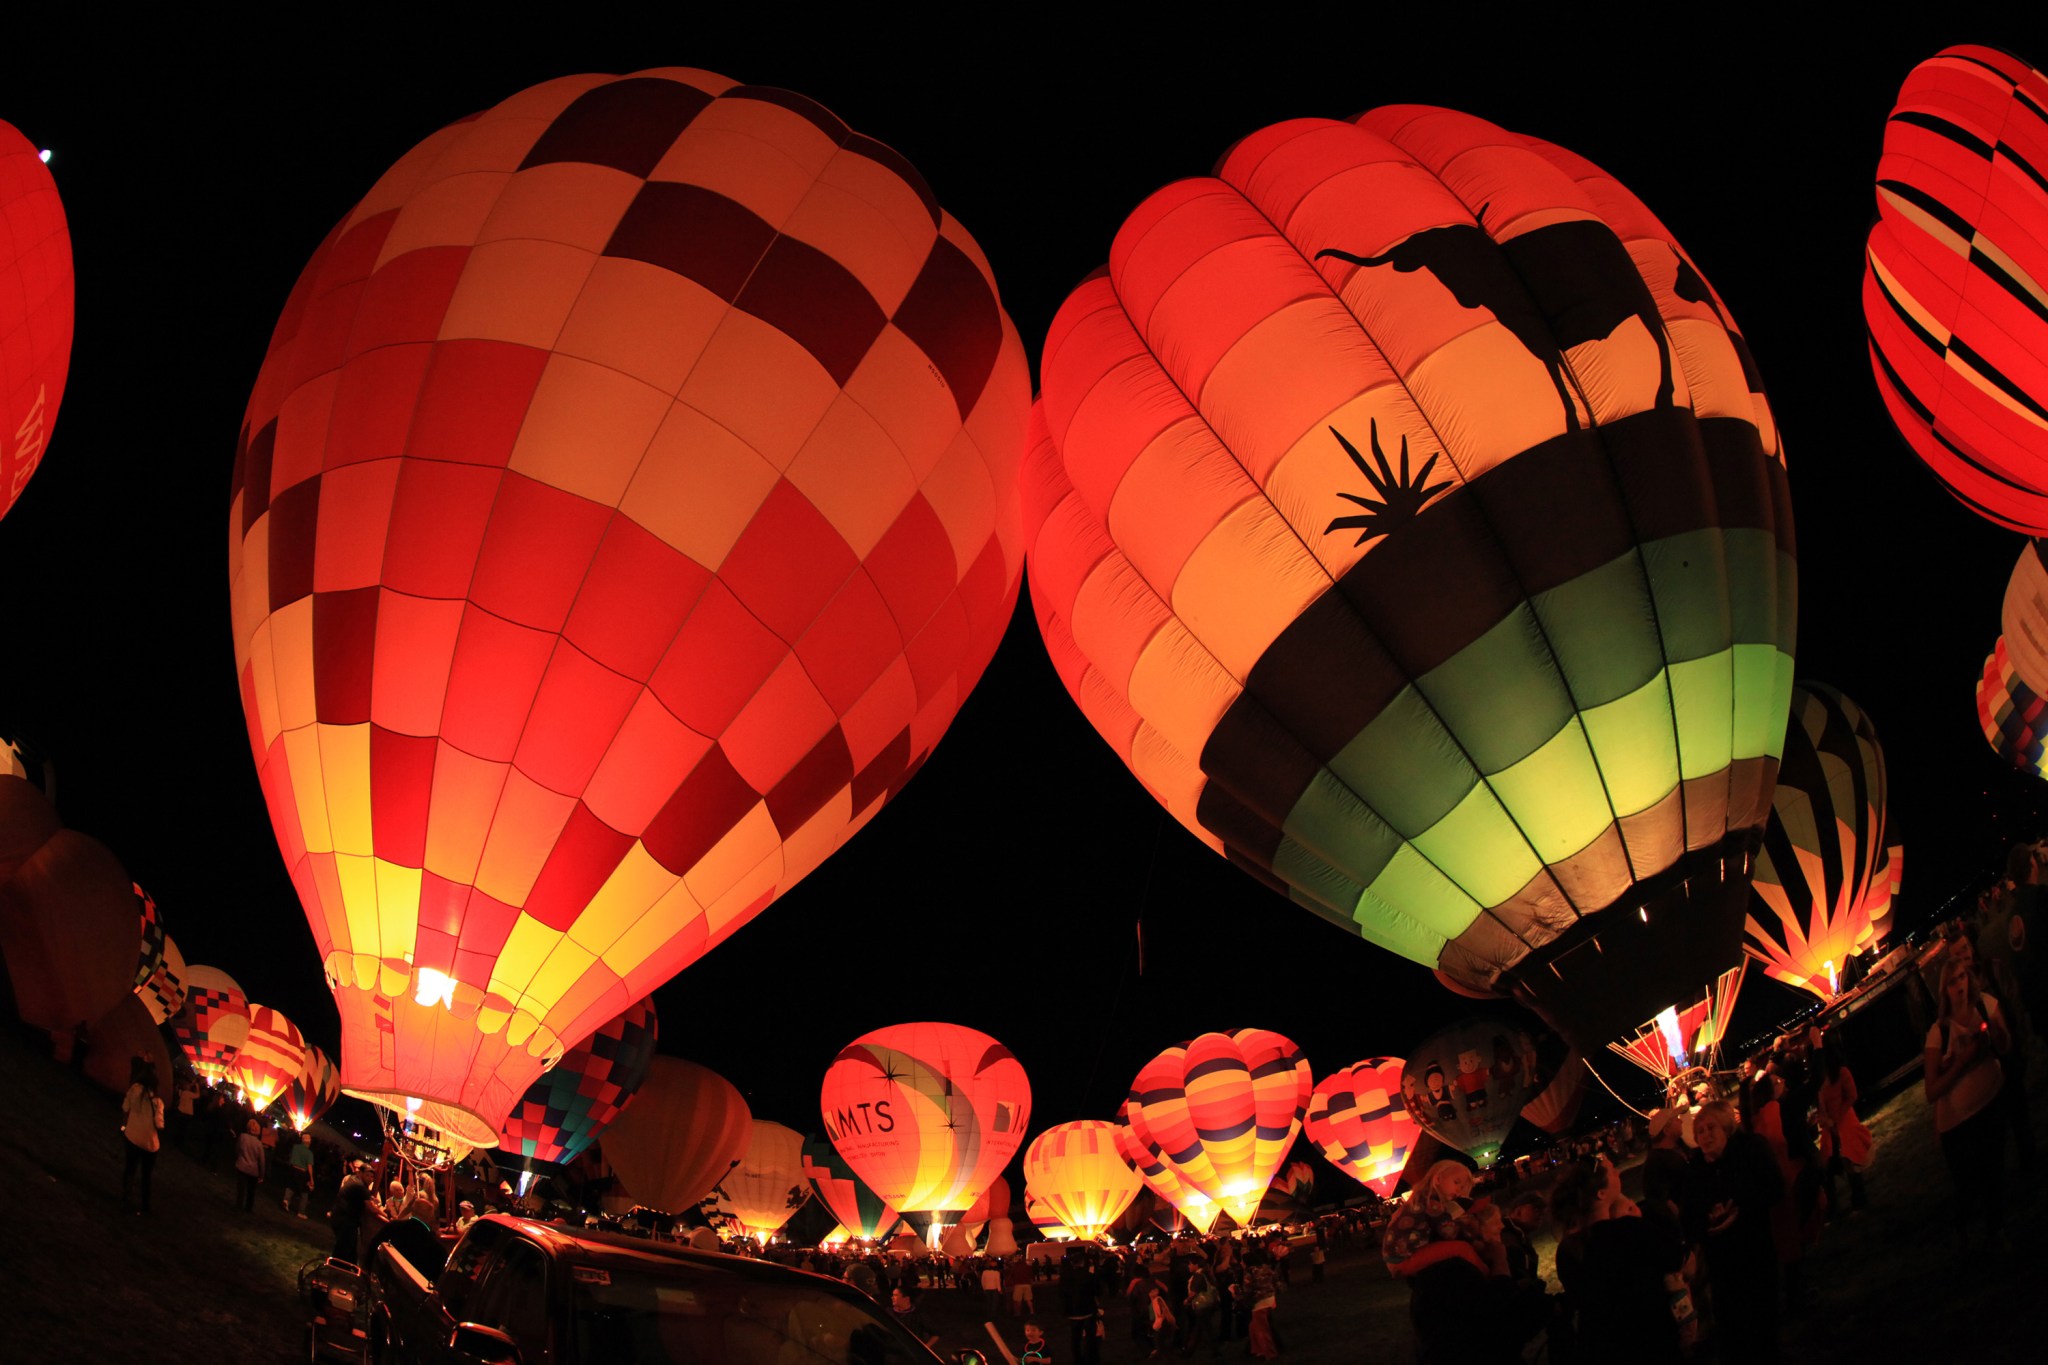 Evening Night Glow events include a coordinated effort for all the balloons light up at once.